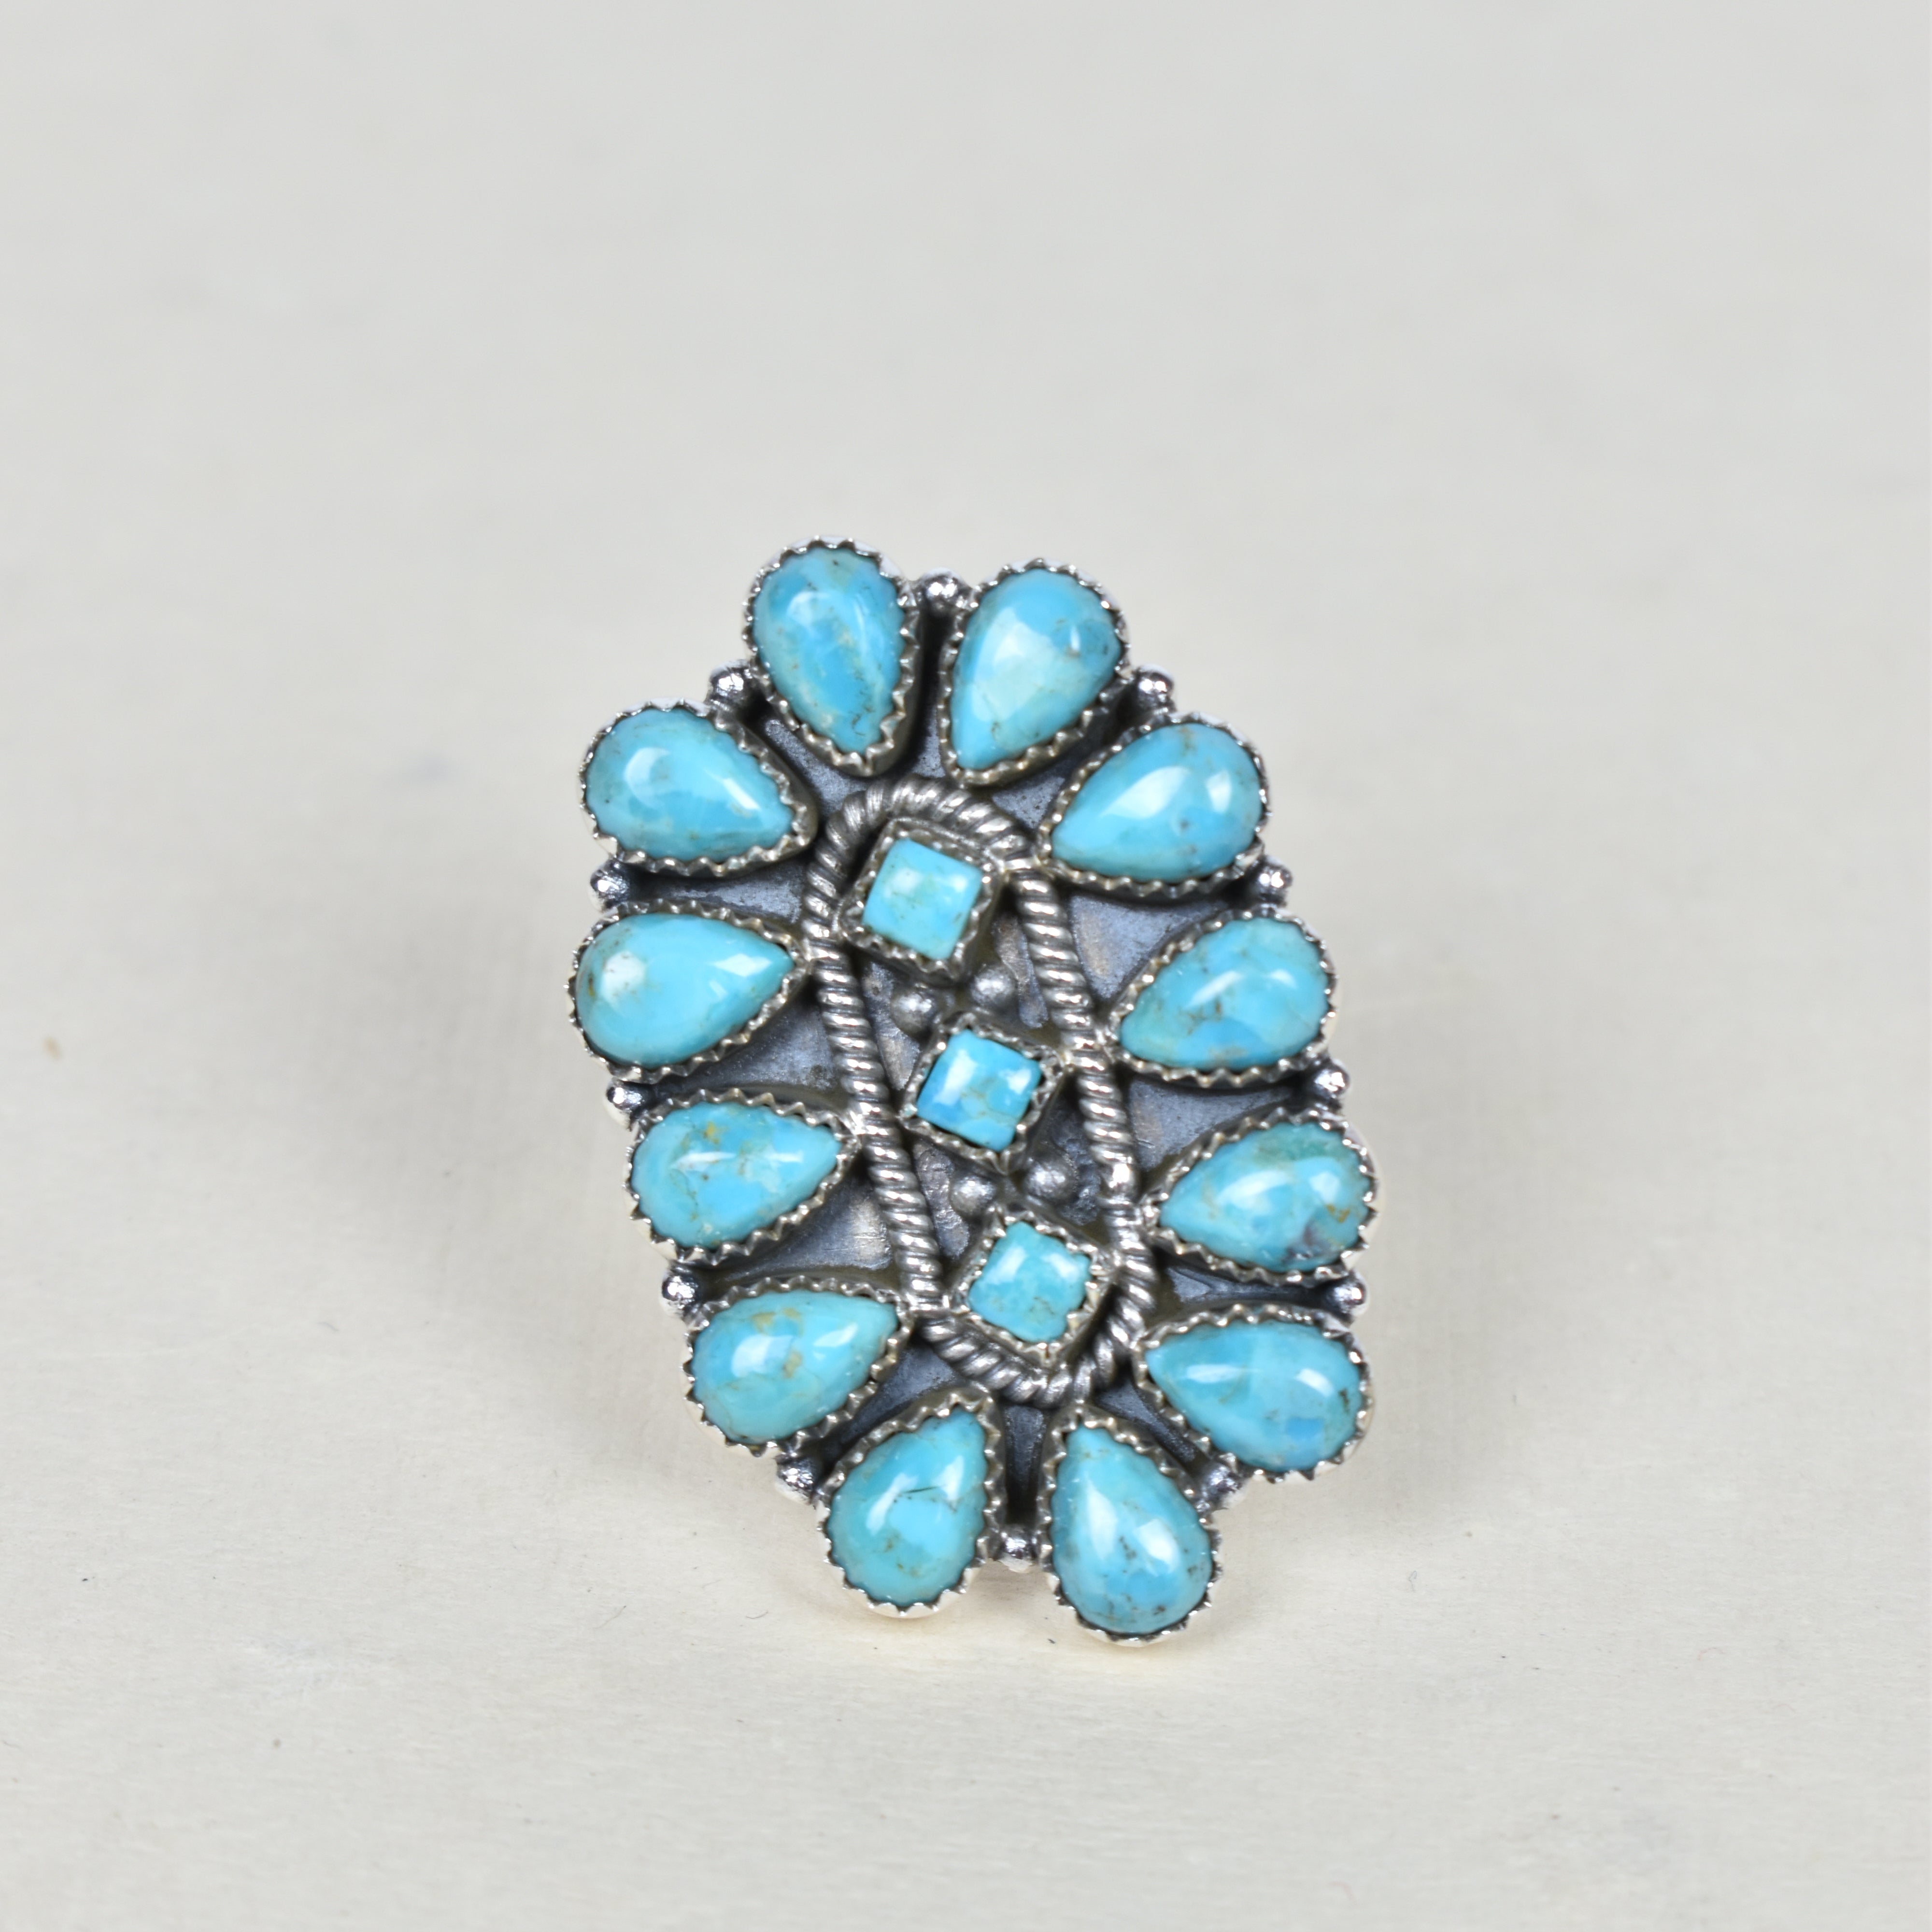 Stellar Sterling Silver Cluster Brooch Ring-Cluster Rings-Krush Kandy, Women's Online Fashion Boutique Located in Phoenix, Arizona (Scottsdale Area)